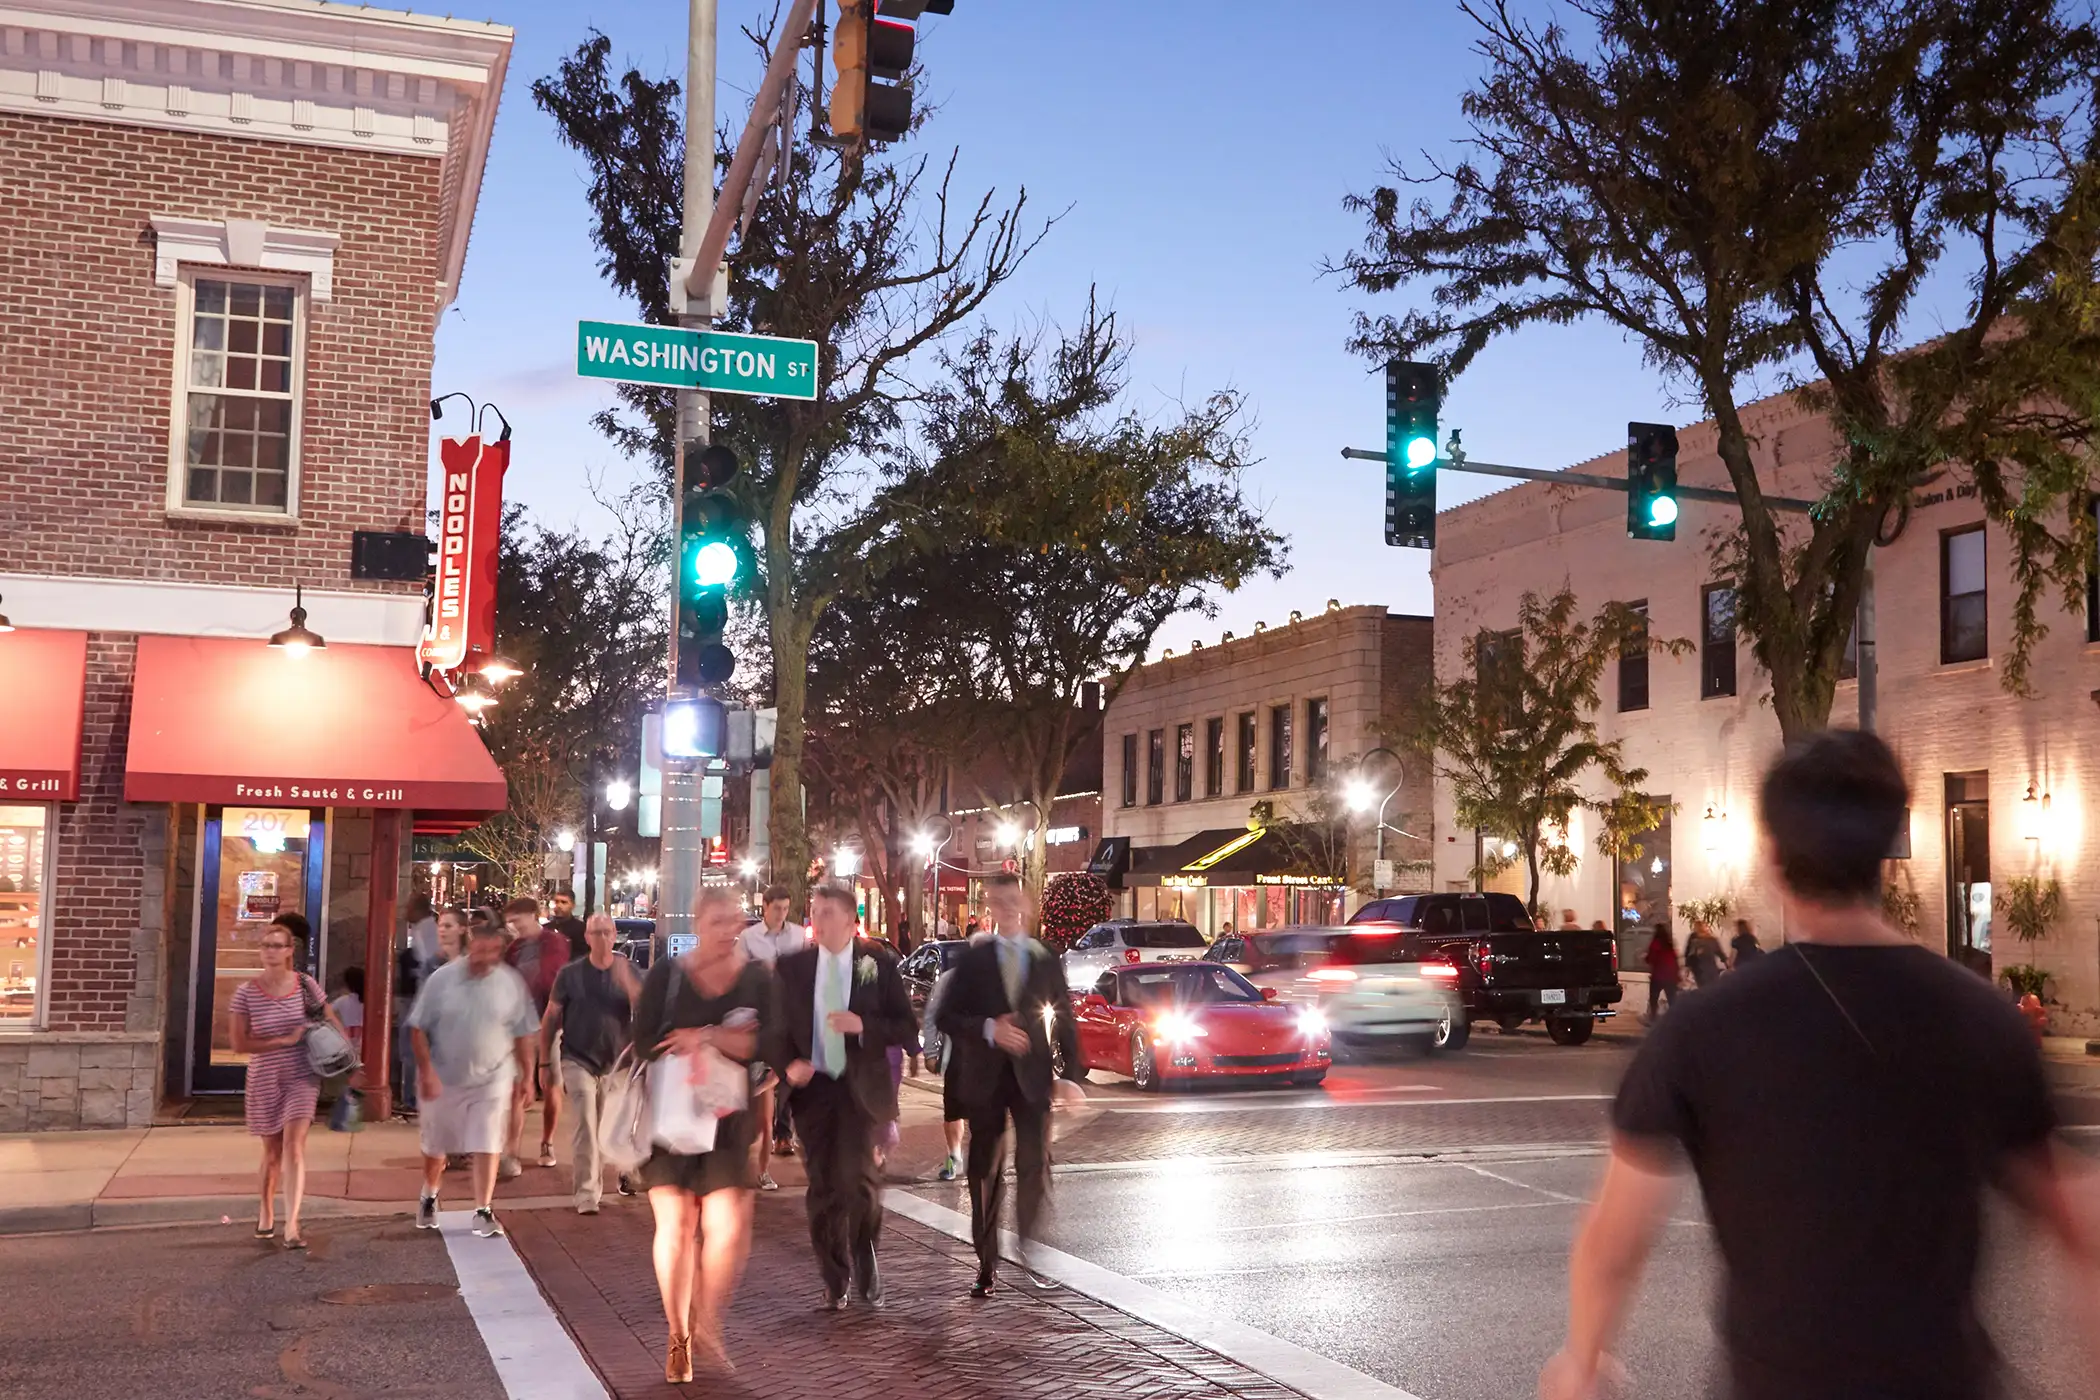 Naperville, Illinois. There's plenty to do in downtown Naperville, with more than 100 shops, 40 restaurants, and the rejuvenated, art-lined Riverwalk.